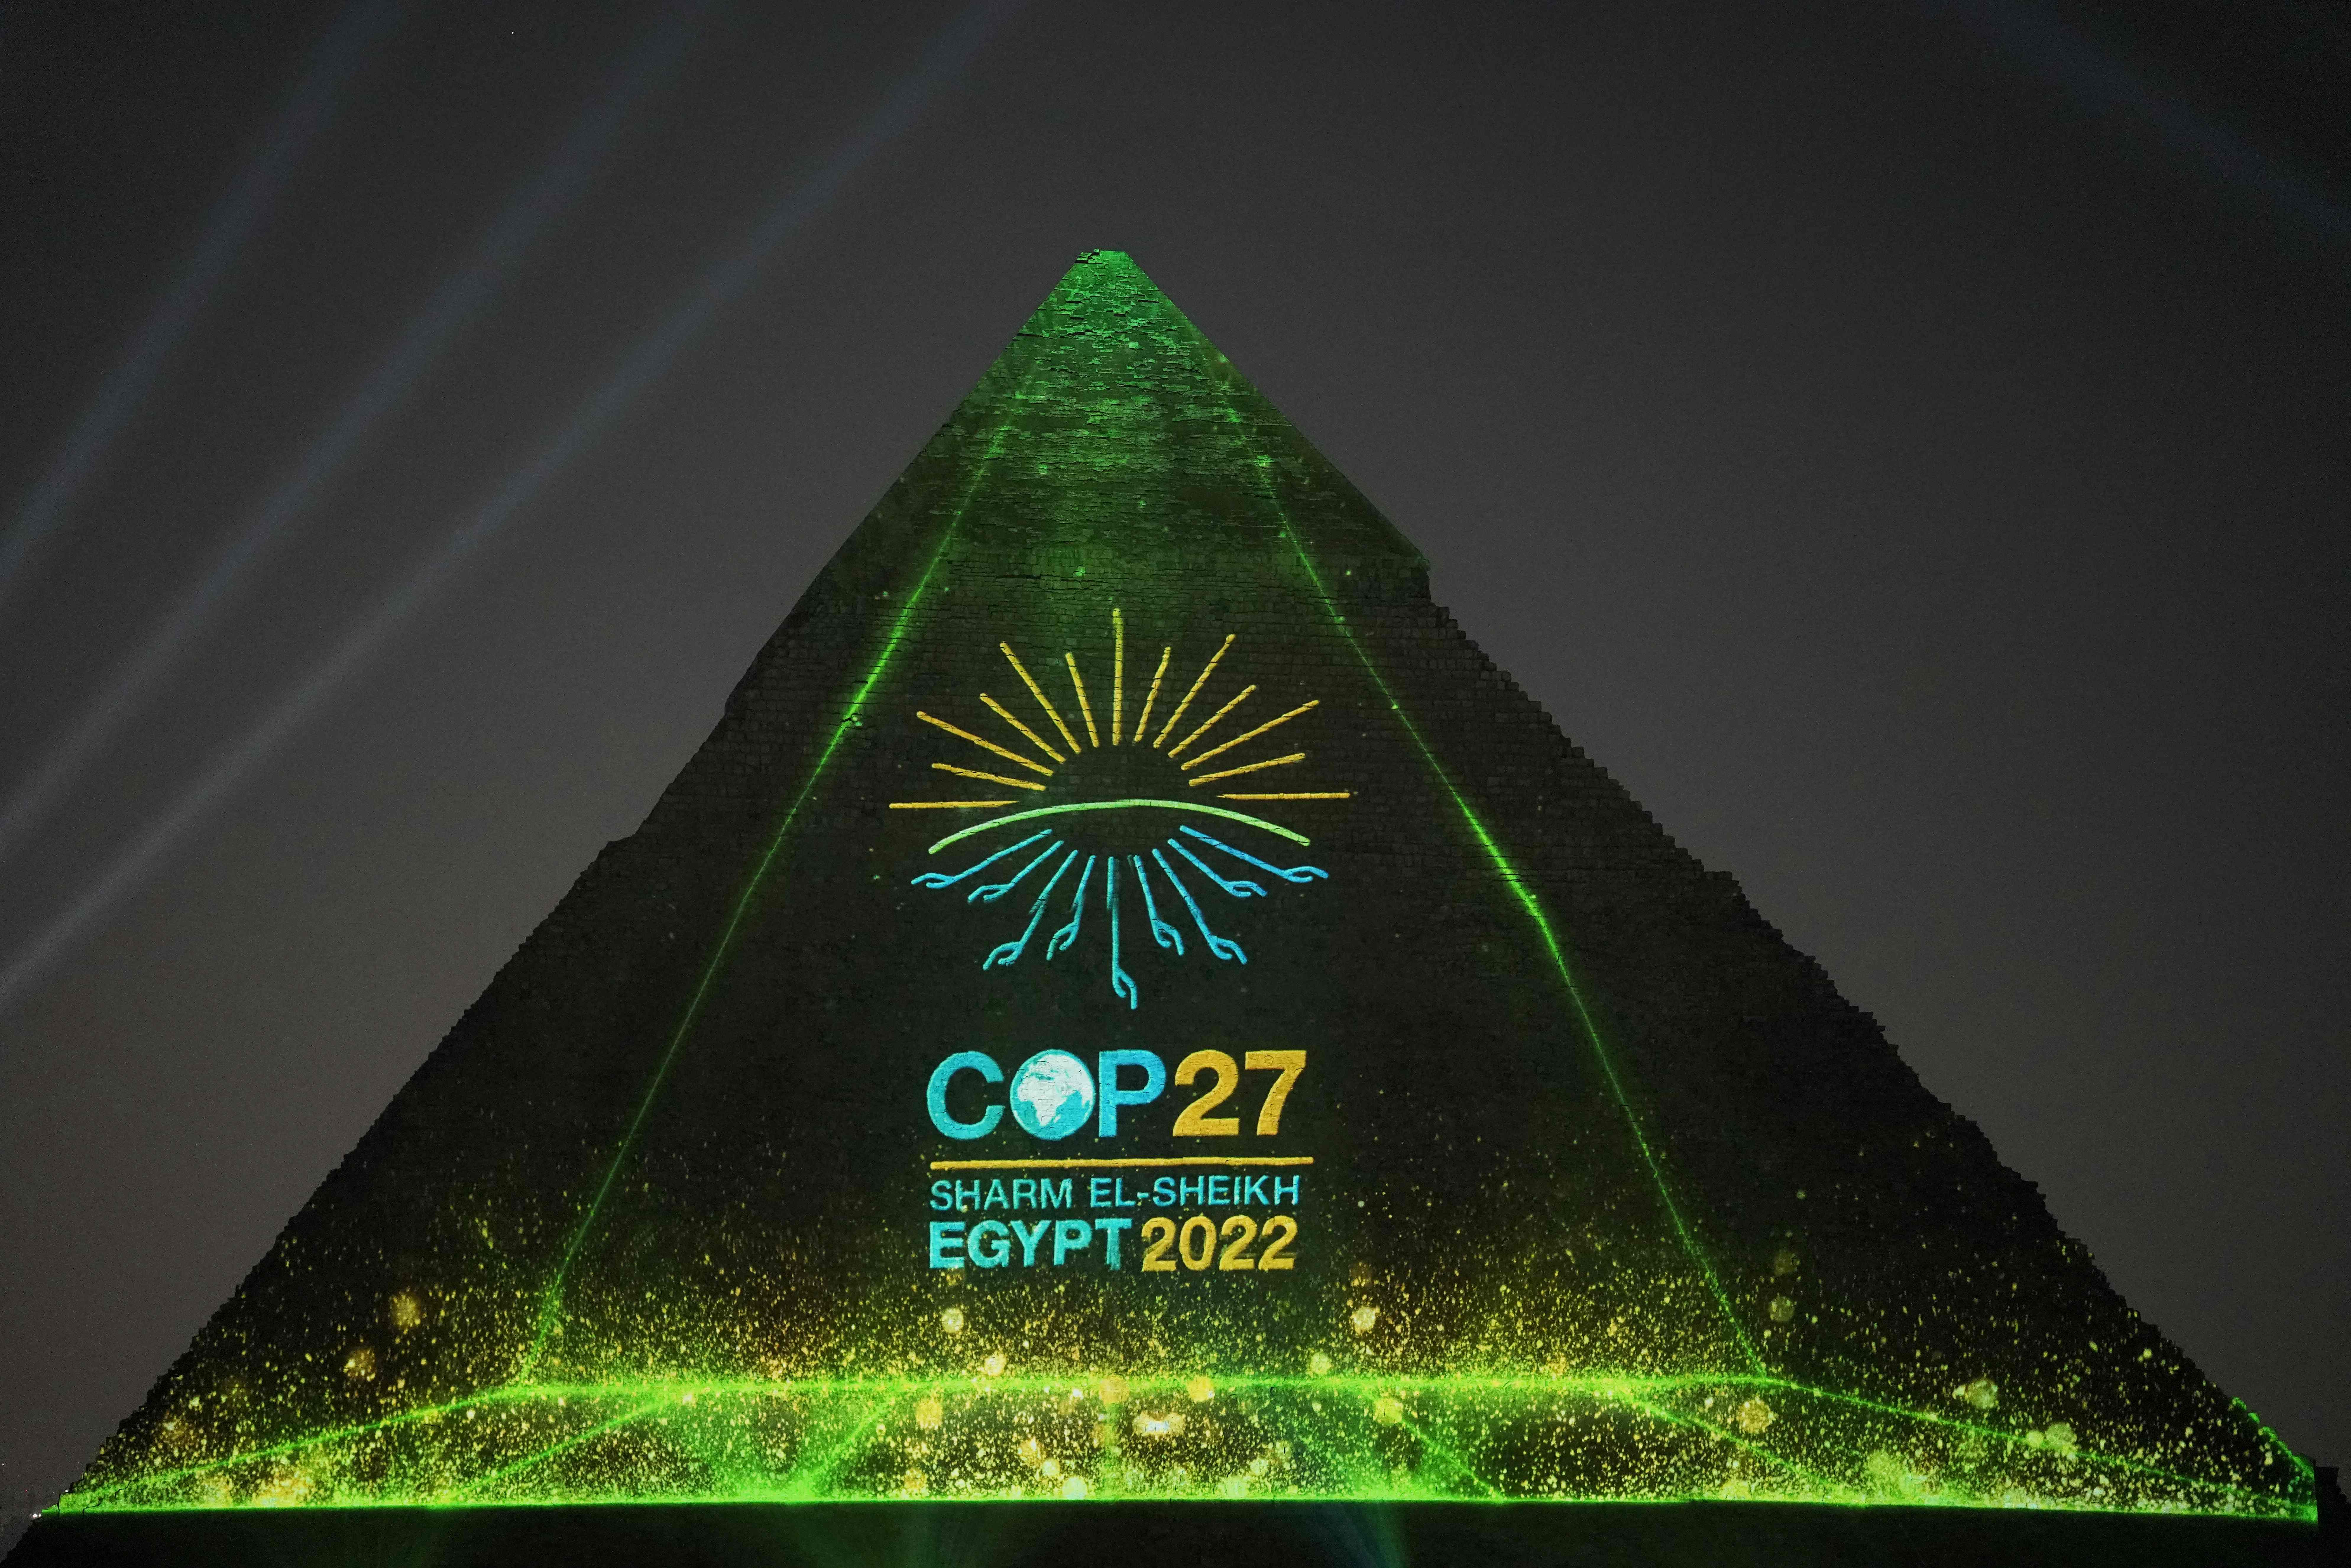 The Cop27 climate summit has begun in Egypt